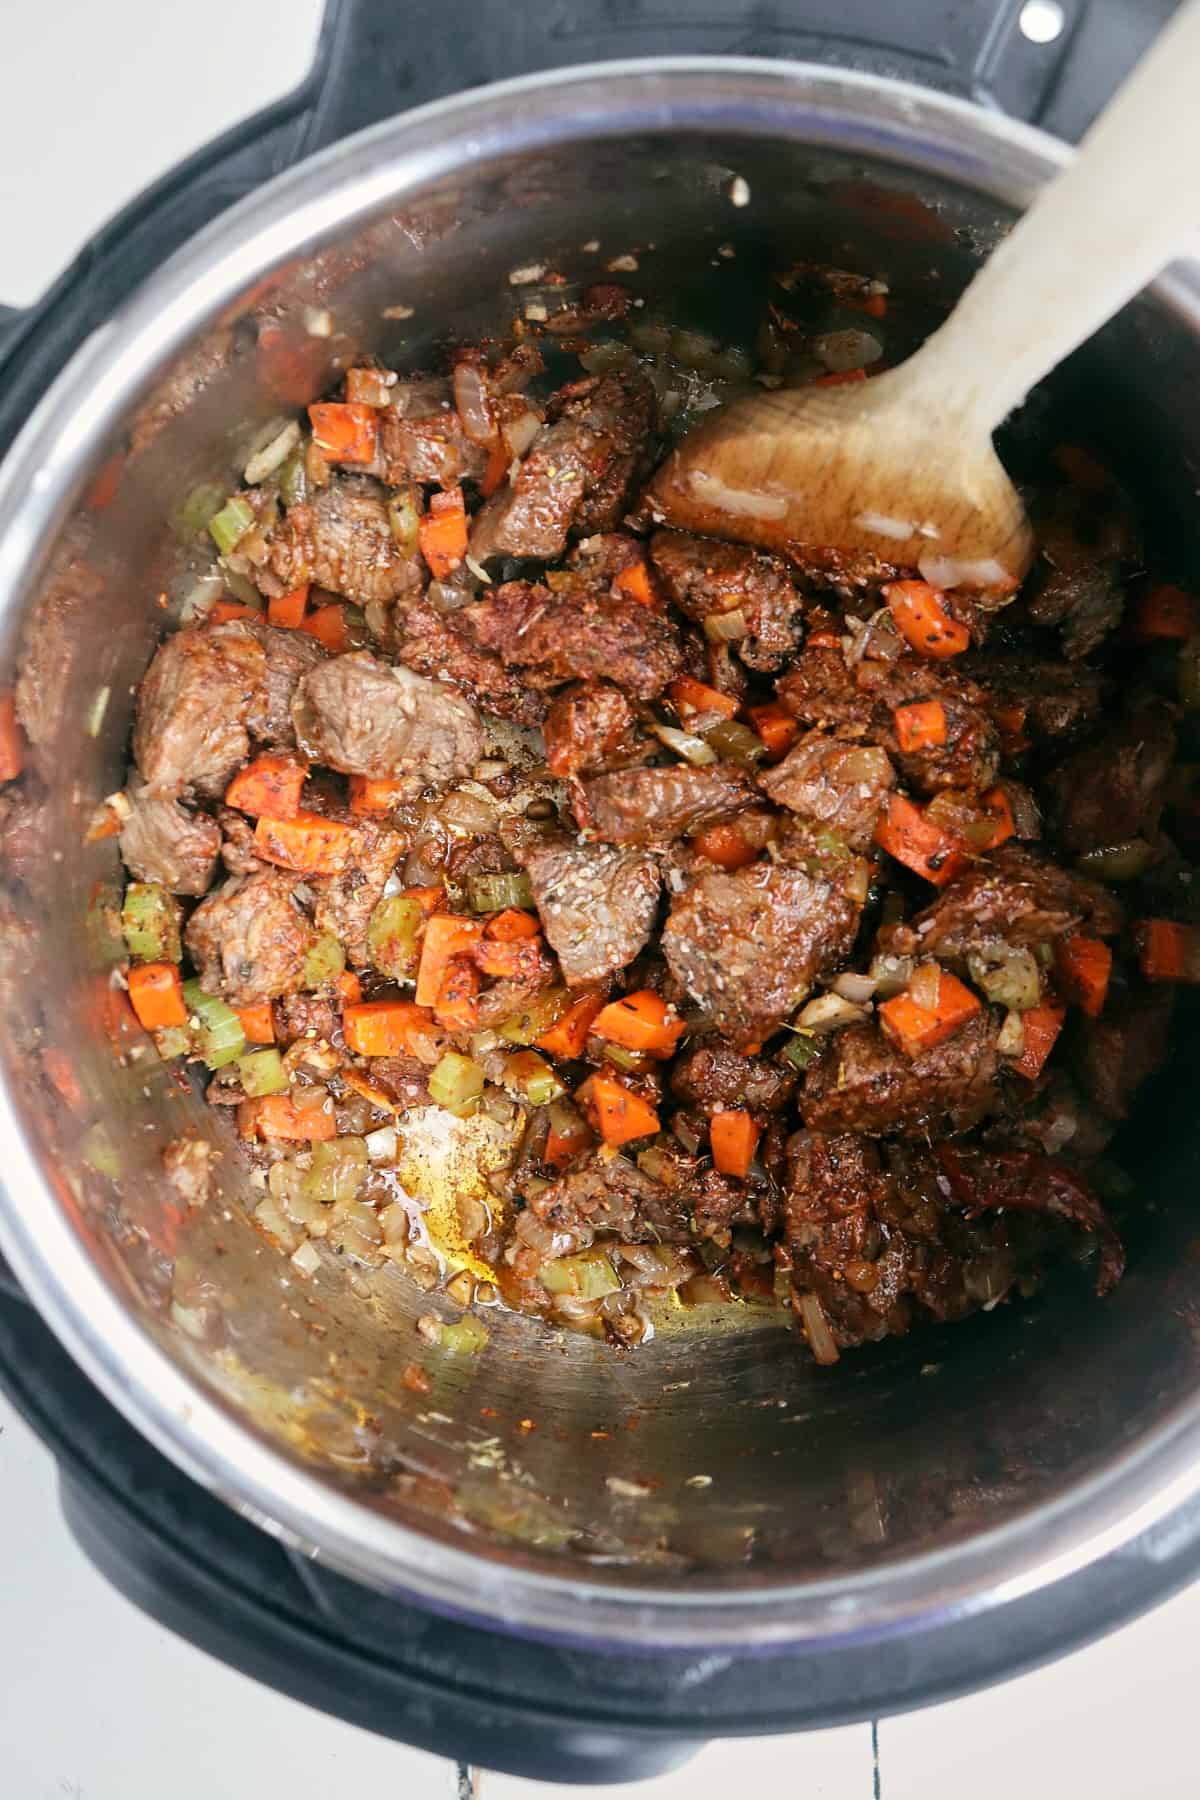 spices browned in the instant pot with meat and veggies.